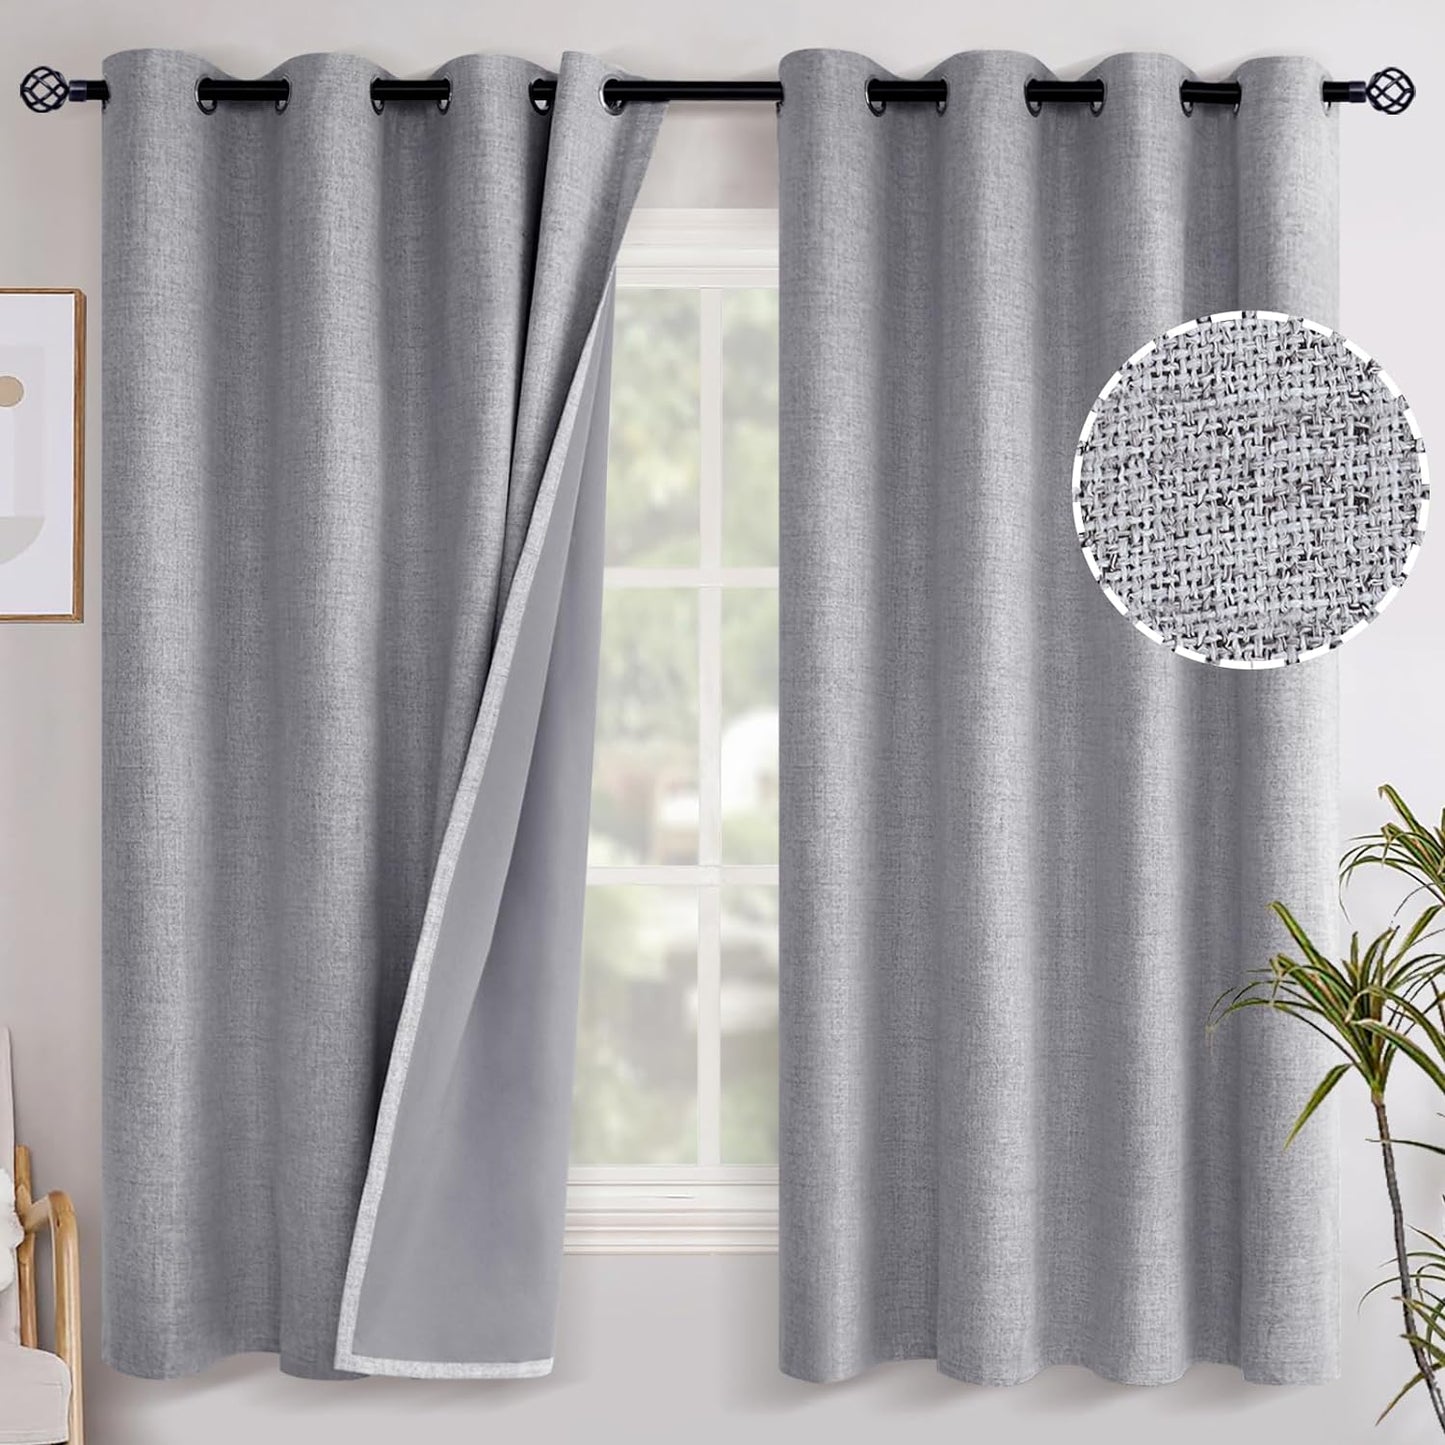 Youngstex Linen Blackout Curtains 63 Inch Length, Grommet Darkening Bedroom Curtains Burlap Linen Window Drapes Thermal Insulated for Basement Summer Heat, 2 Panels, 52 X 63 Inch, Beige  YoungsTex Grey 52W X 63L 